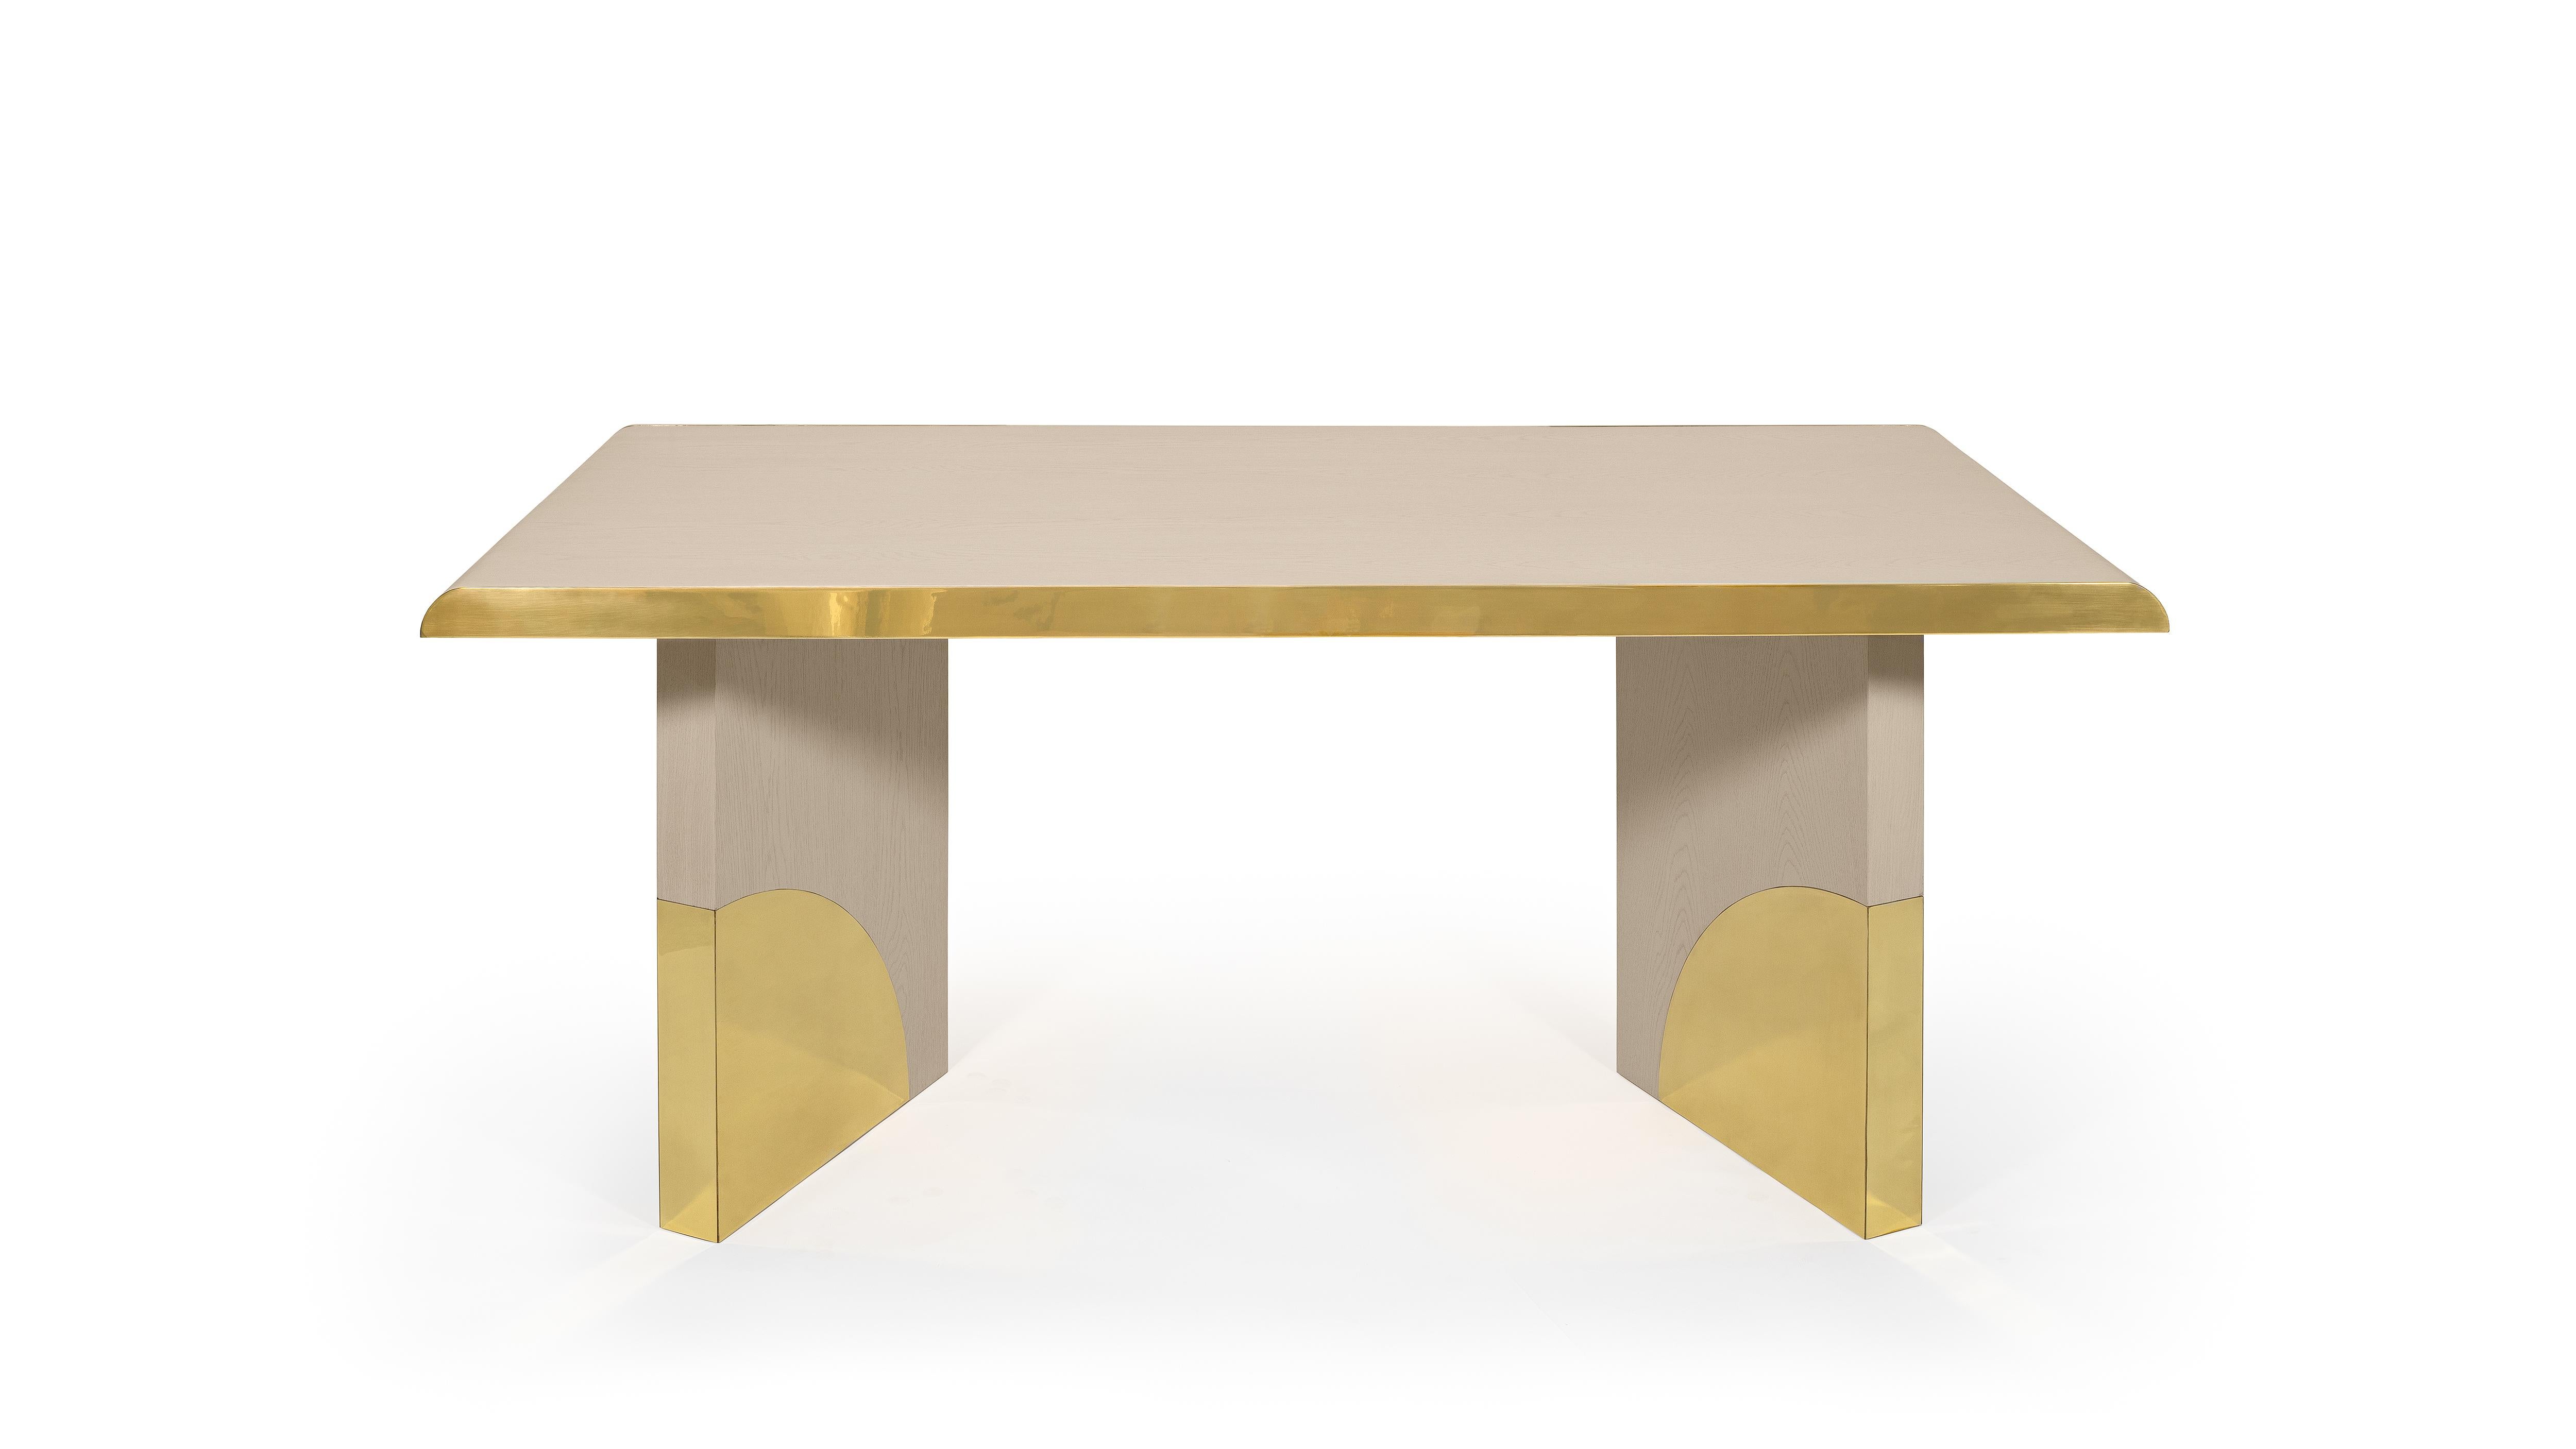 Utopia Desk by InsidherLand
Dimensions: D 76 x W 160 x H 74 cm.
Materials: Oak veneer in open grain with cream finish and polished brass.
70 kg.
Other finishes are available

Since the Renaissance, many attempts have been made to develop ideal